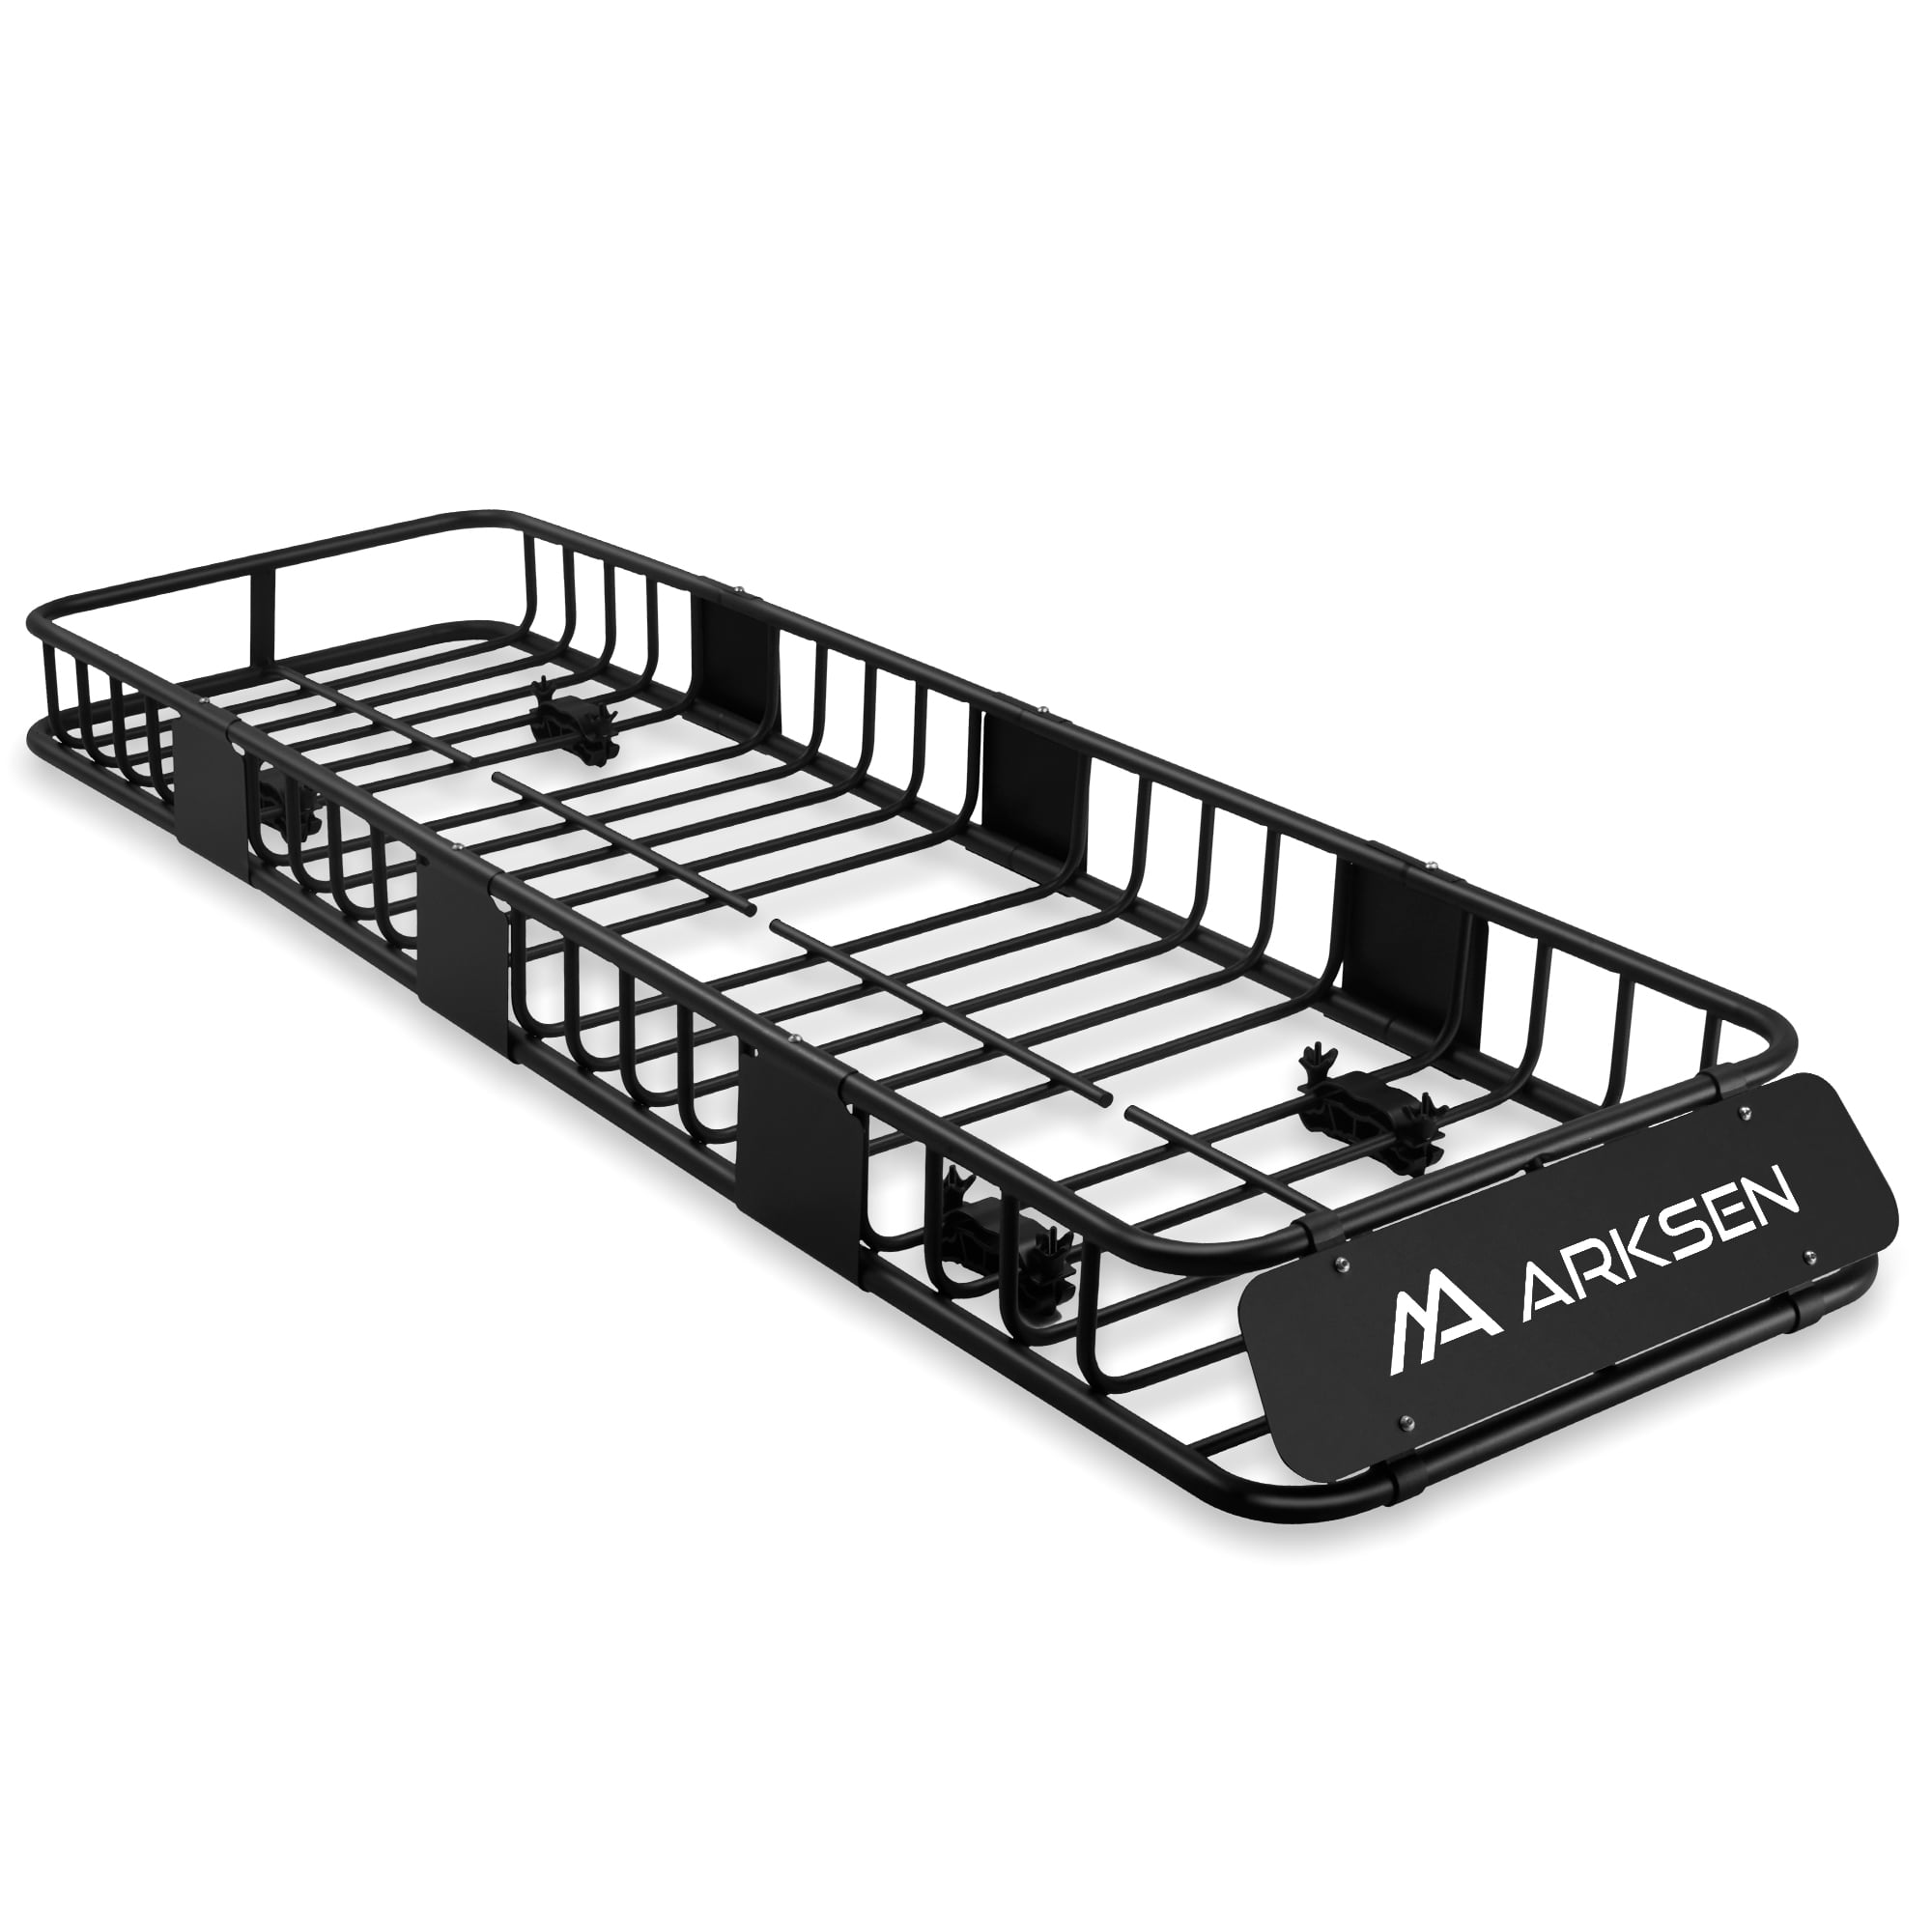 ARKSEN 84x23x6 Long and Narrow Car Roof Rack Cargo Carrier Rooftop Basket  & Net, Heavy Duty Weather Resistant Luggage & Camping Gear Storage for Car,  Truck or SUV Transport 